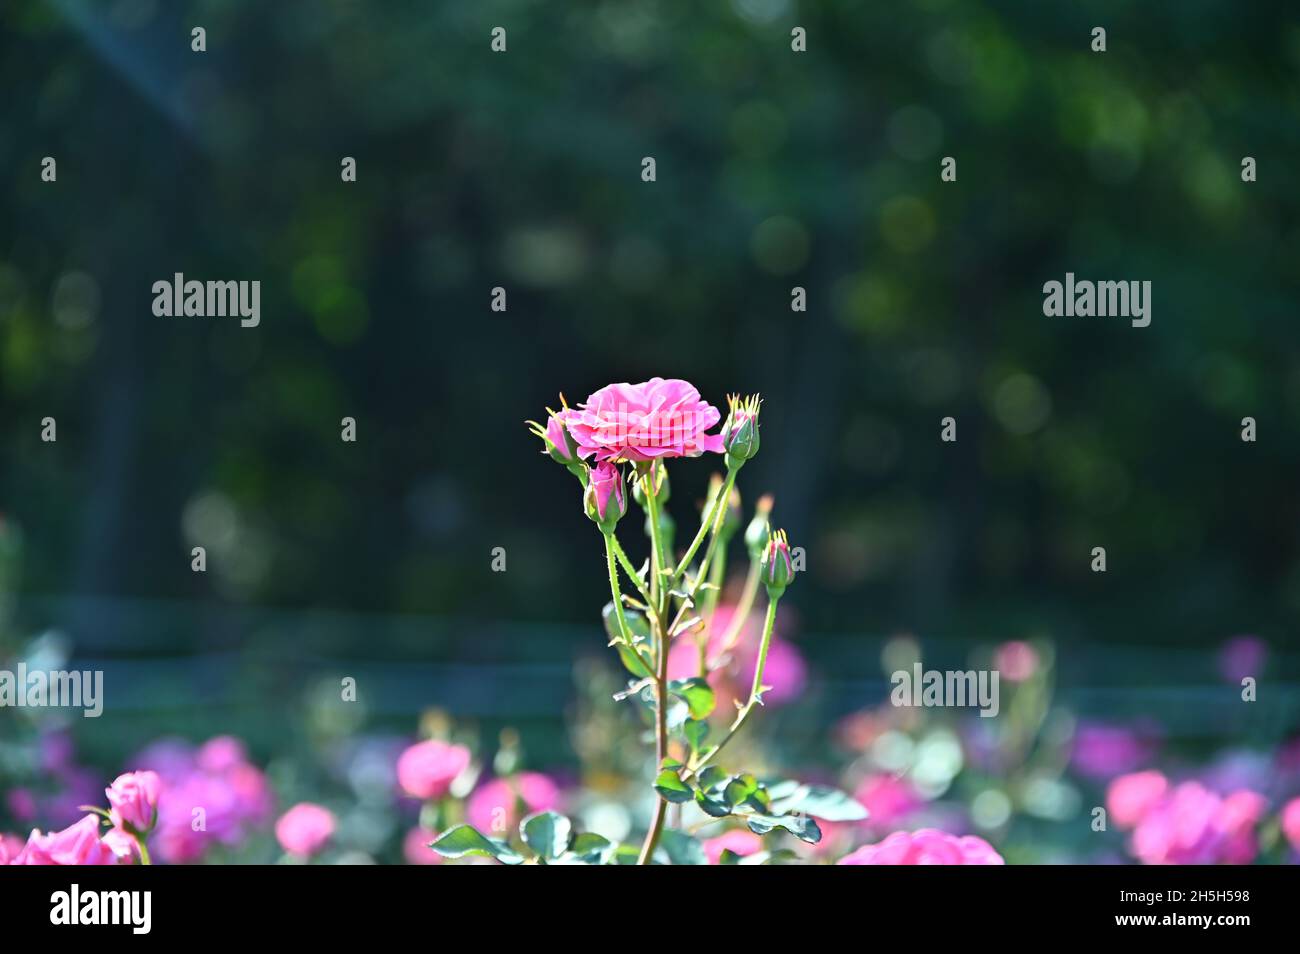 Seeing a beautifully bloomed rose makes me want to give it to my loved one. Stock Photo